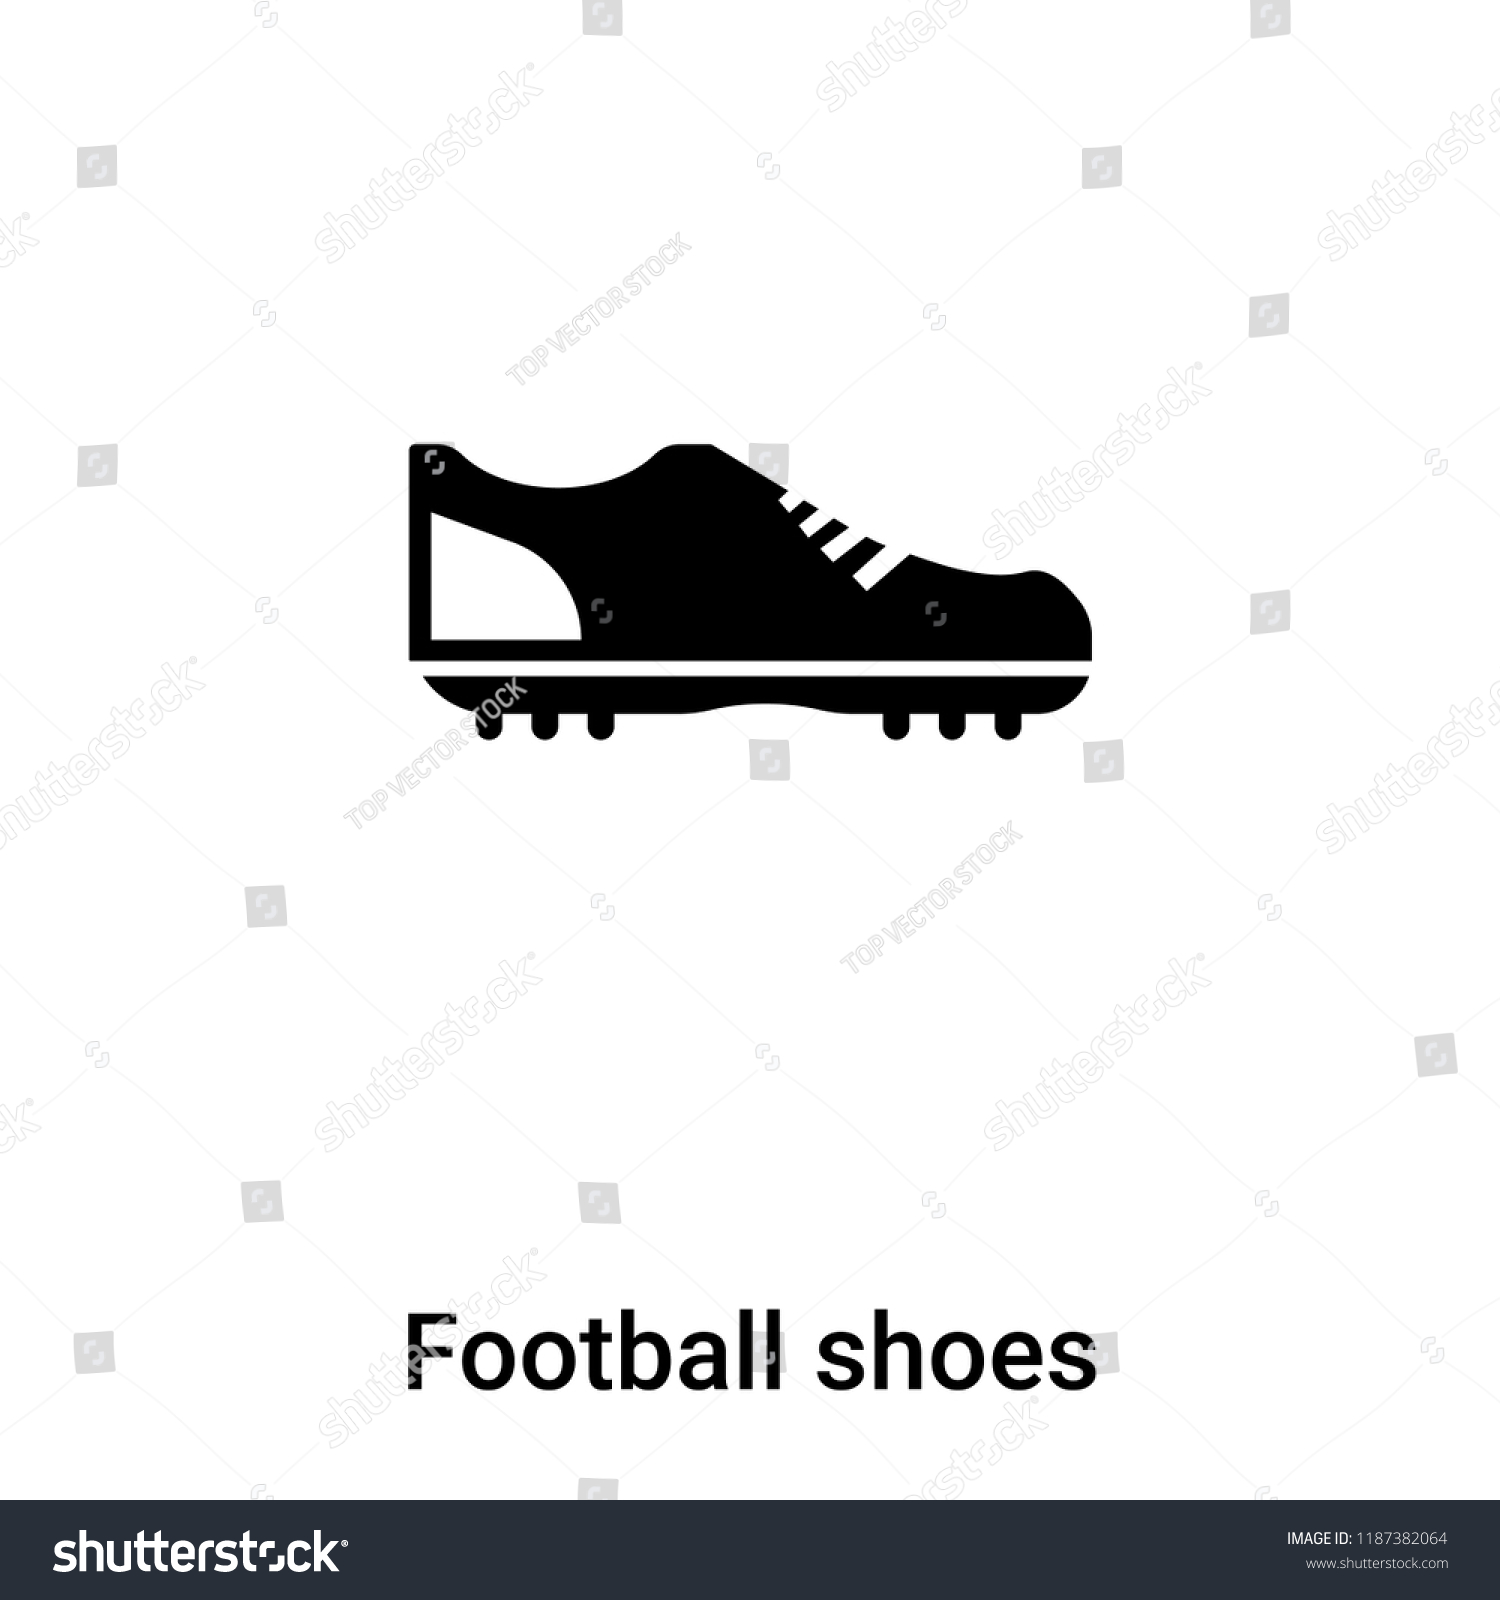 SVG of Football shoes icon vector isolated on white background, logo concept of Football shoes sign on transparent background, filled black symbol svg